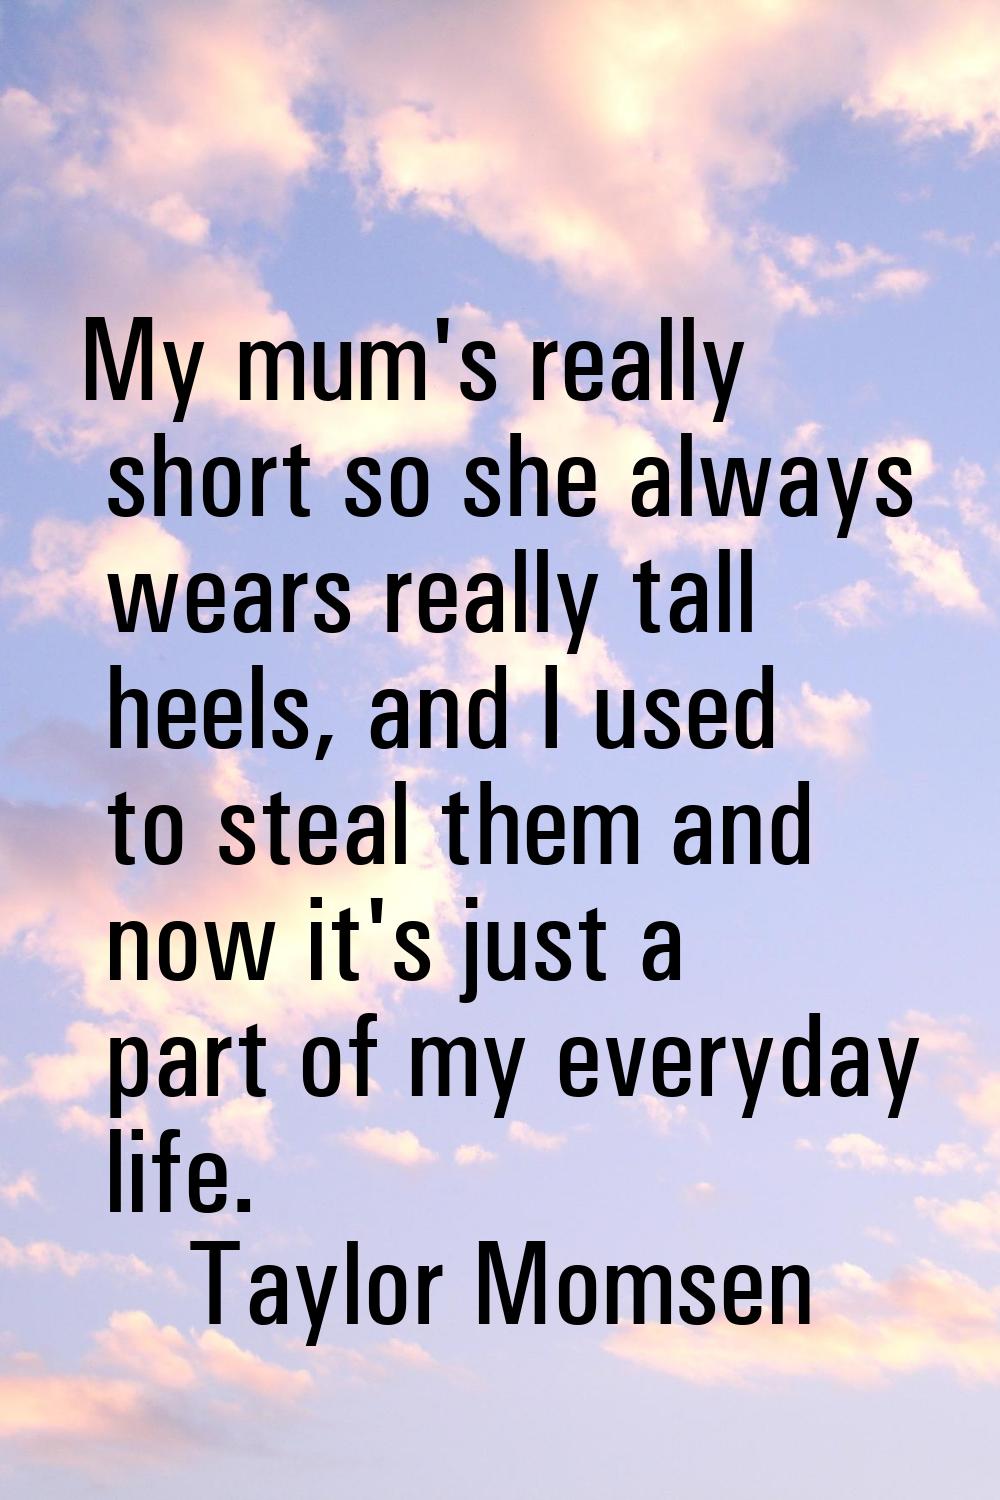 My mum's really short so she always wears really tall heels, and I used to steal them and now it's 